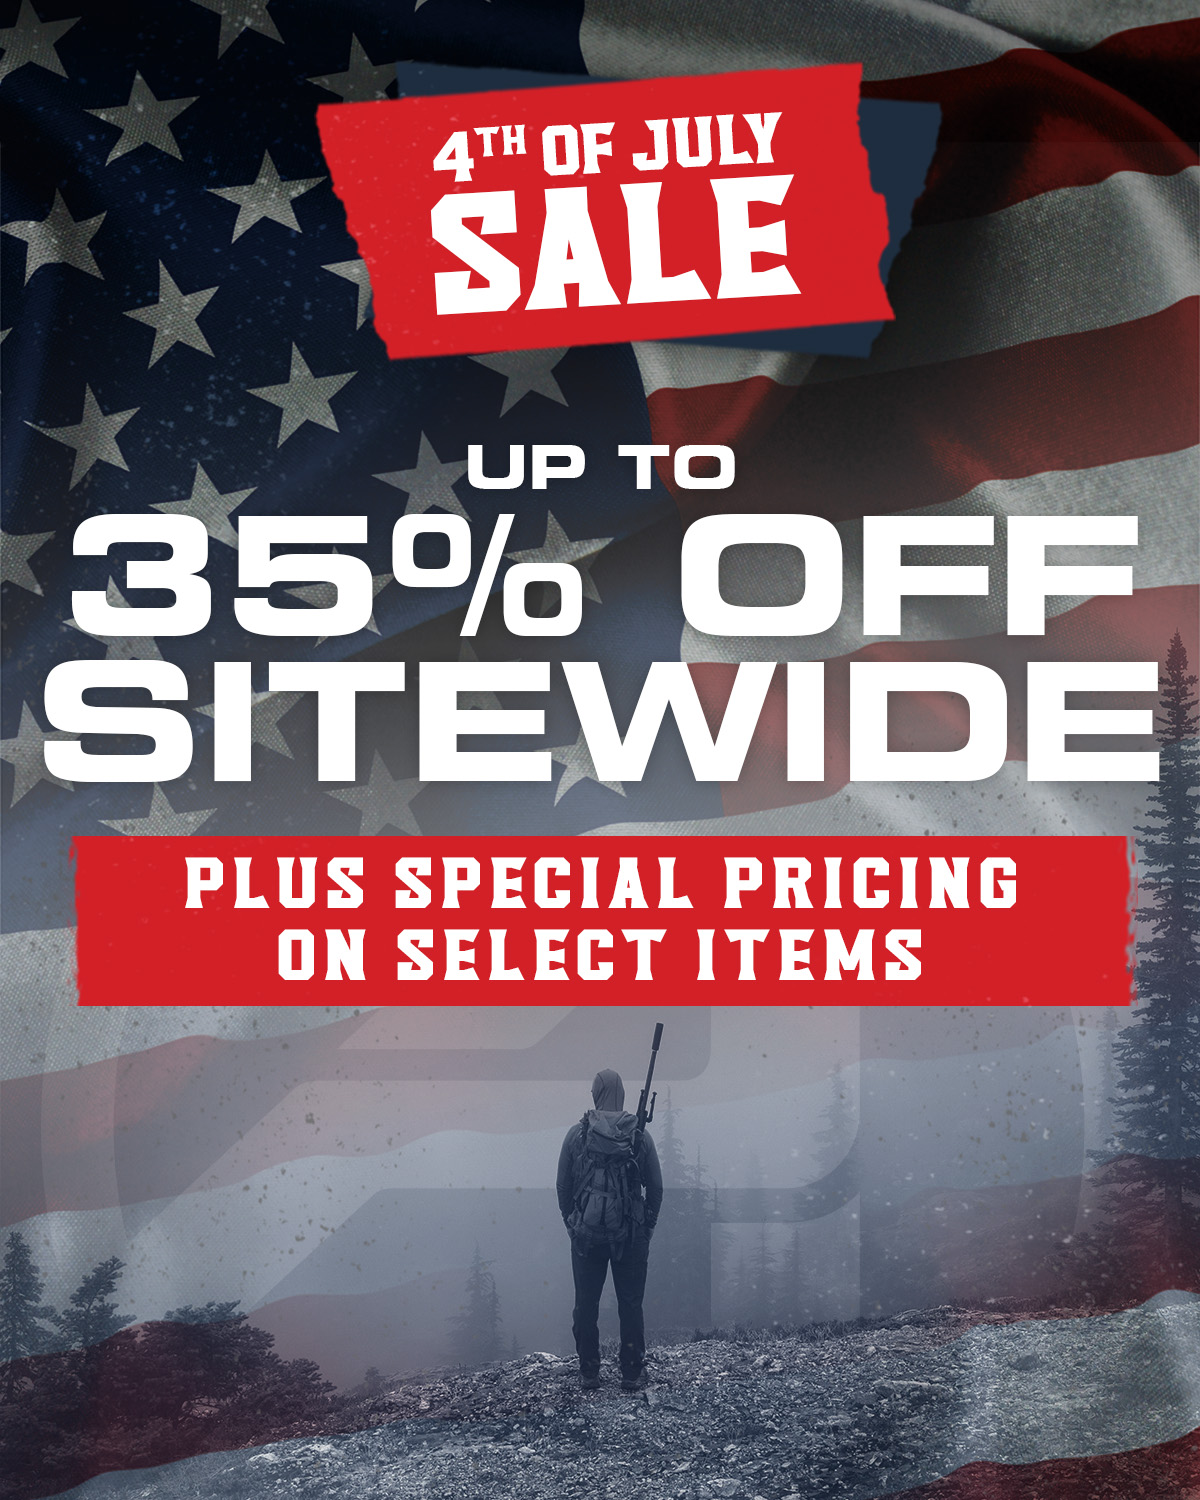 4TH OF JULY SALE | UP TO 35% OFF SITEWIDE PLUS SPECIAL PRICING ON SELECT ITEMS